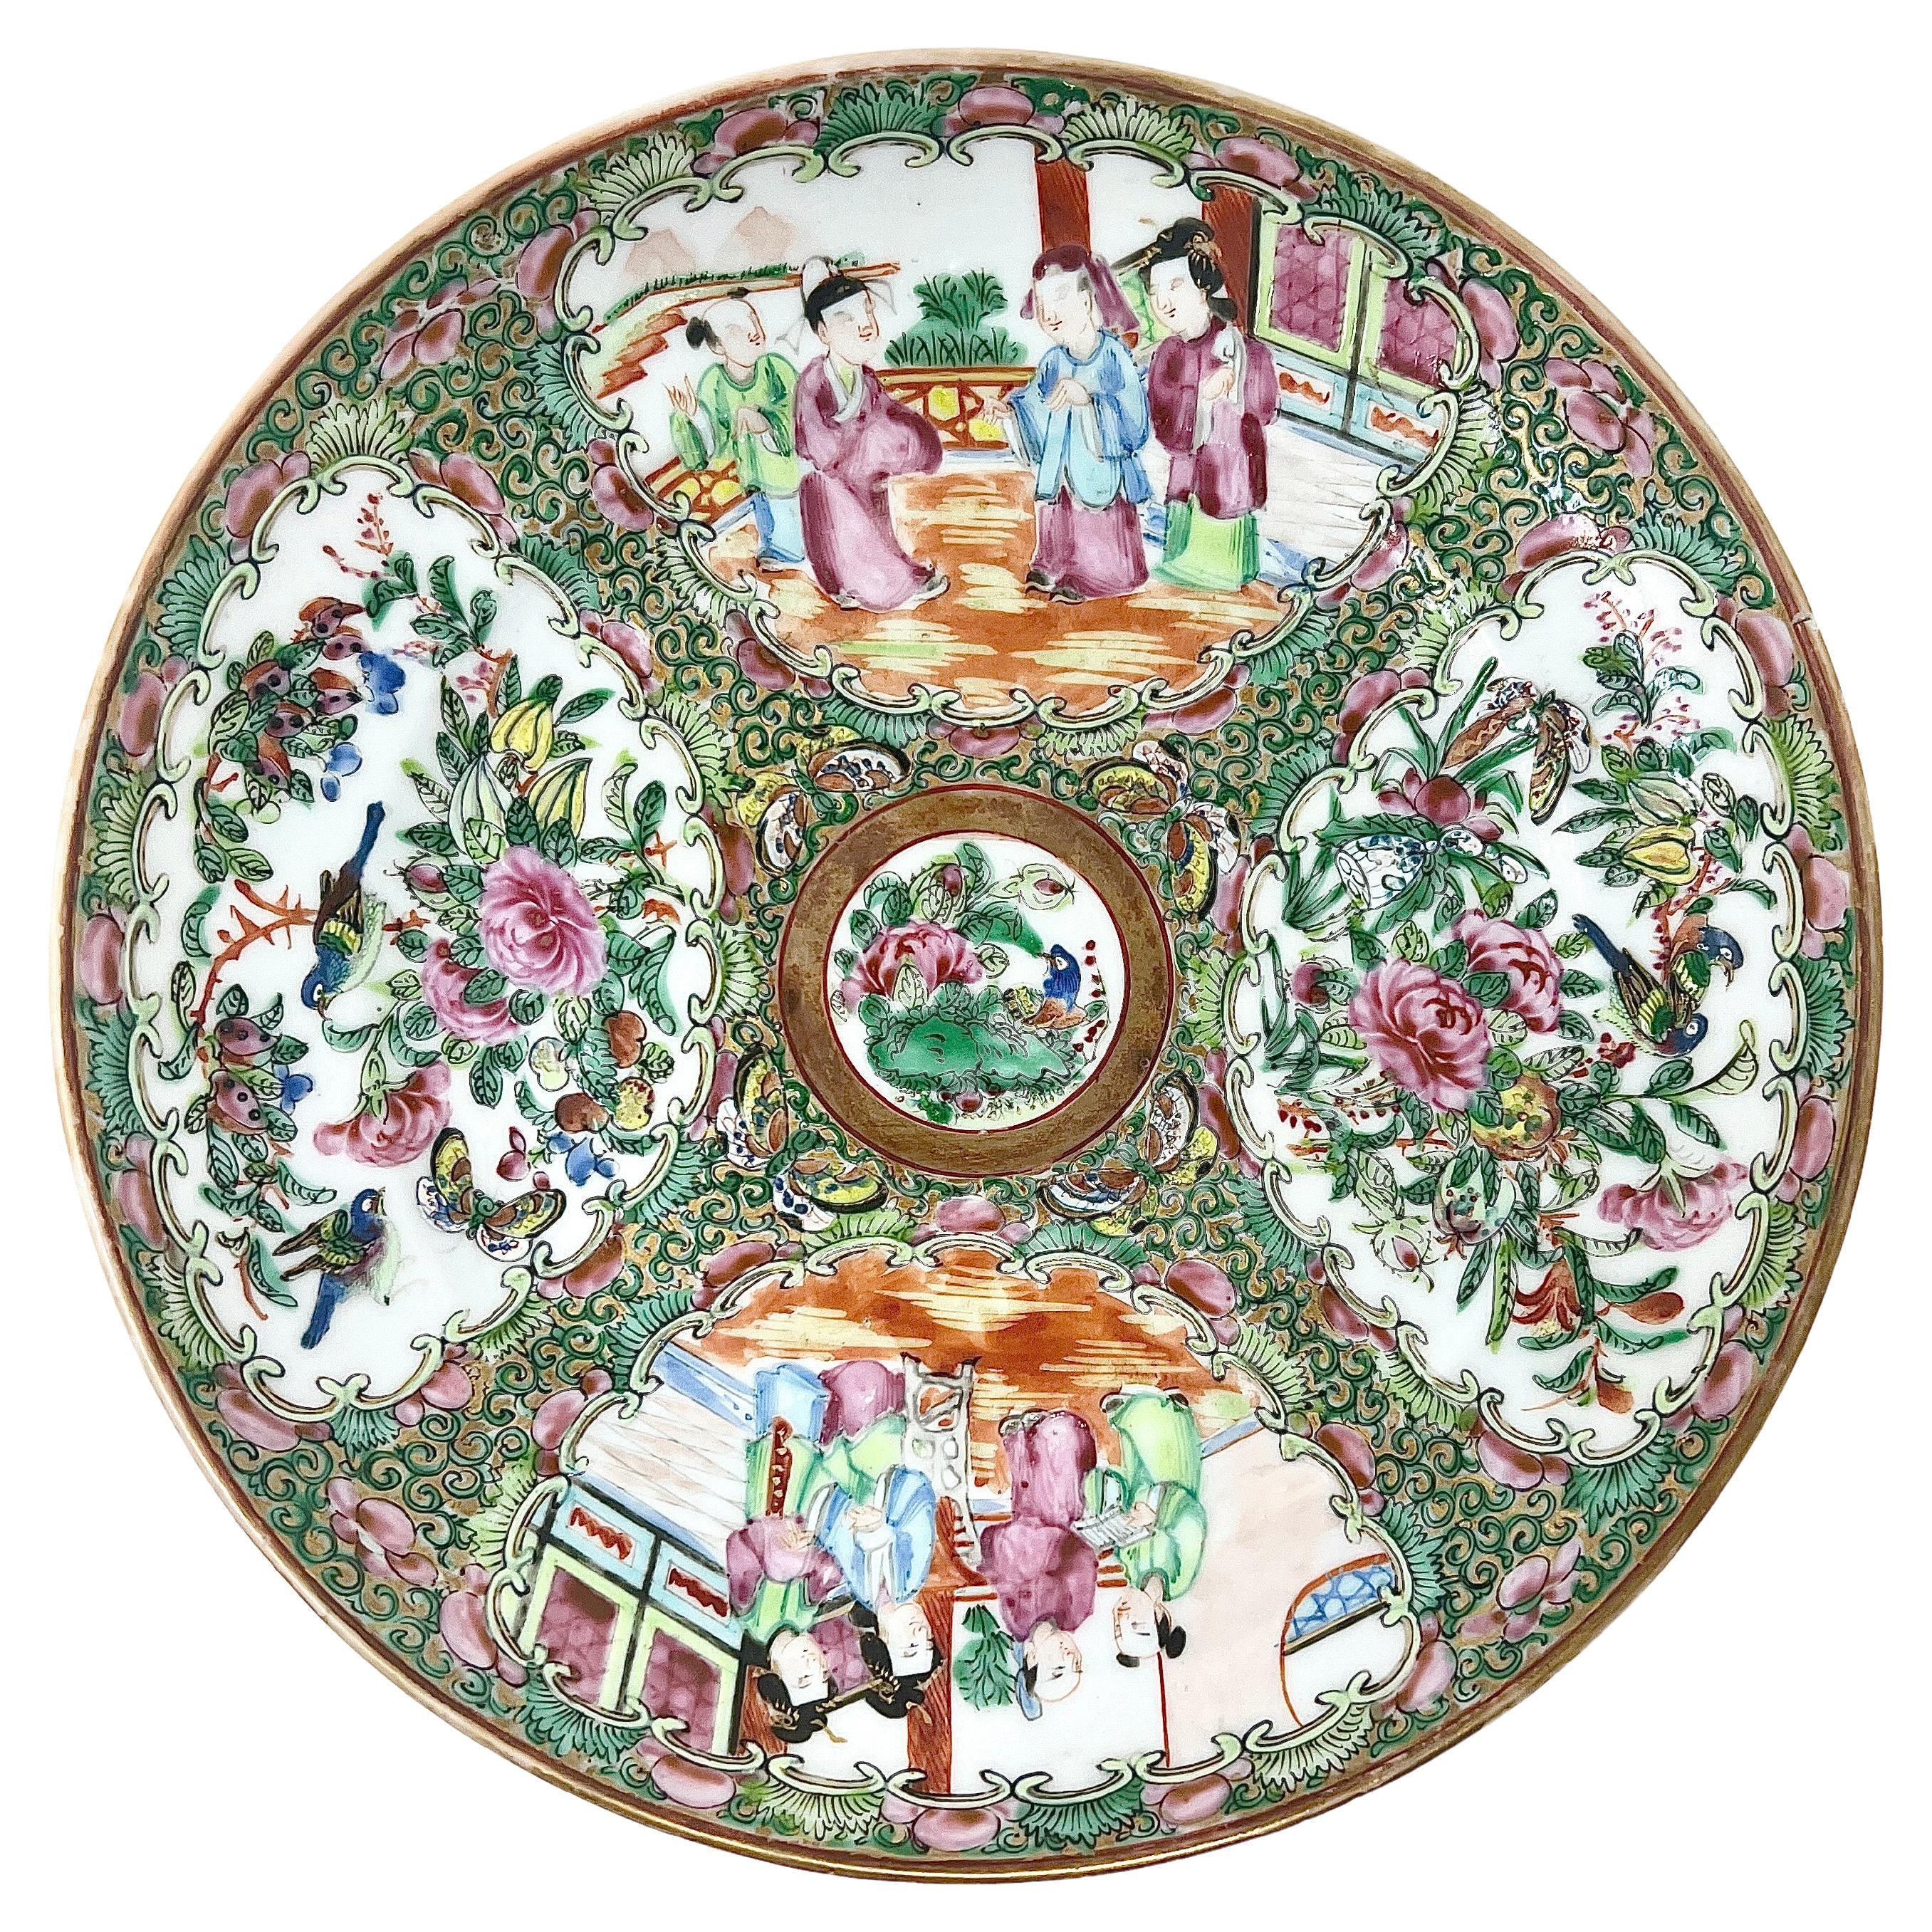 Antique Chinese Famille Rose Porcelain Plate, Circa 1880-1890. For Sale